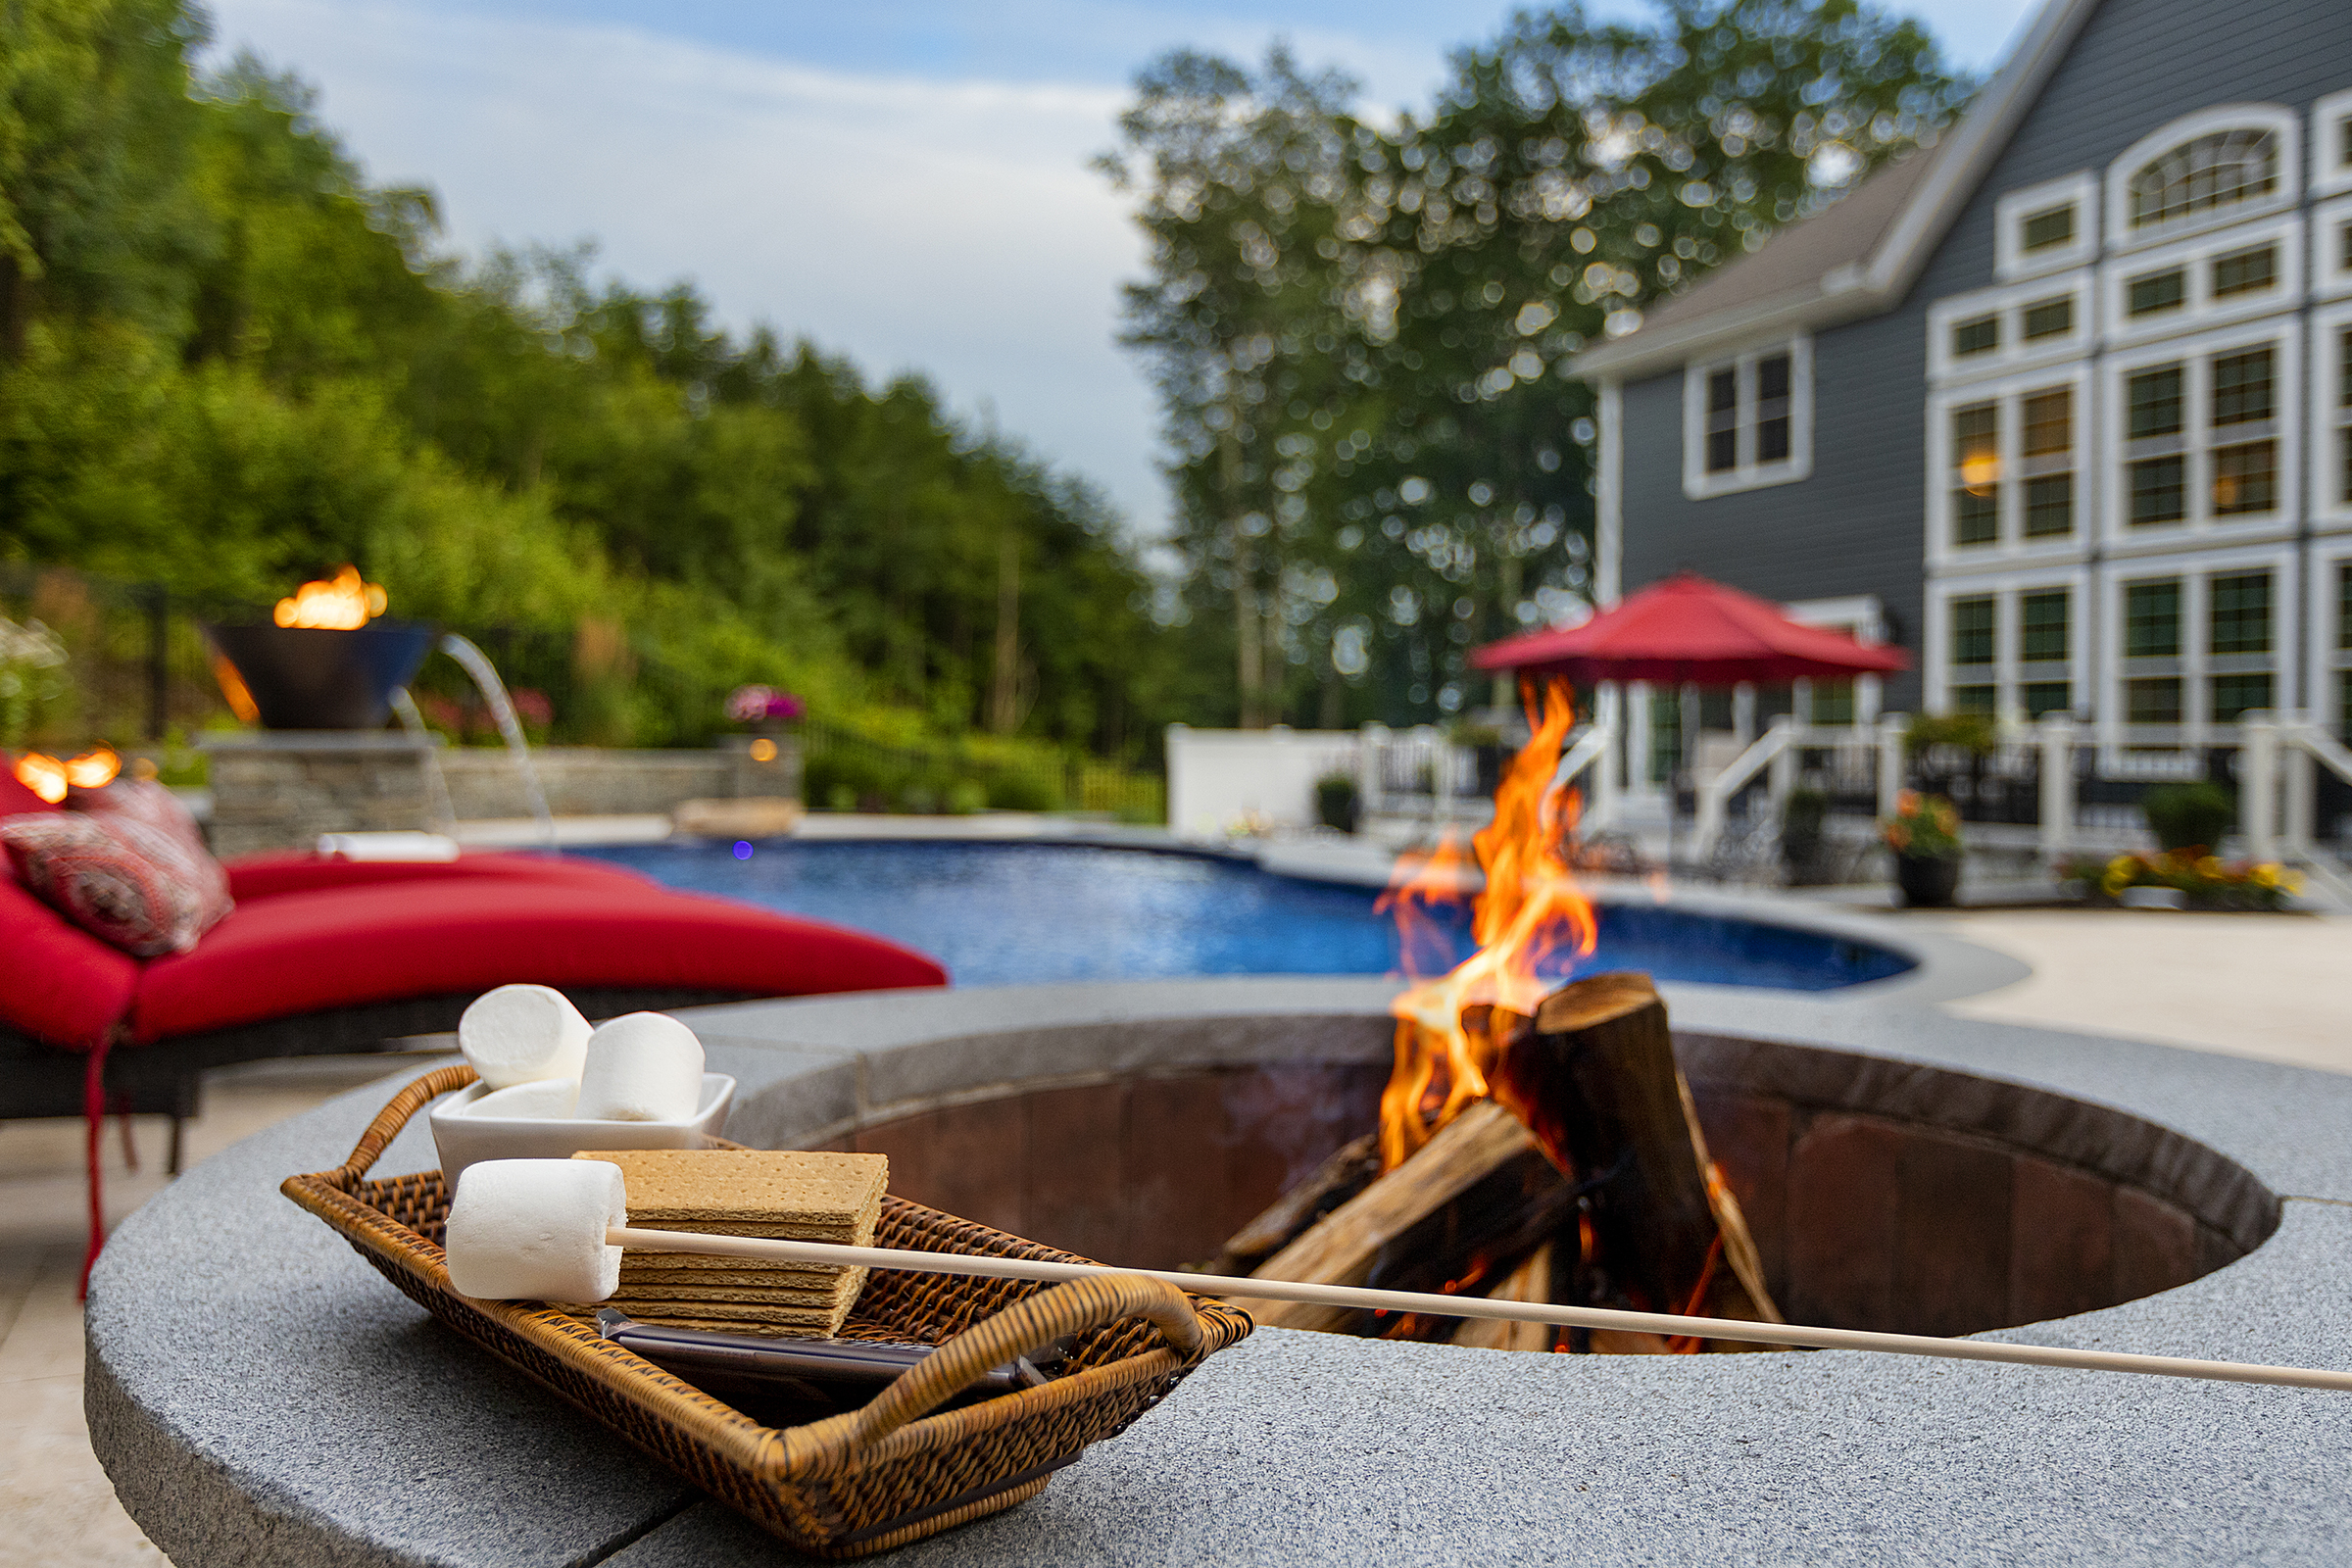 S'more kit by a wood-burning fire pit. Pool, fire bowl, and home in background. Dex by Terra Hardscaping in Sterling, MA.